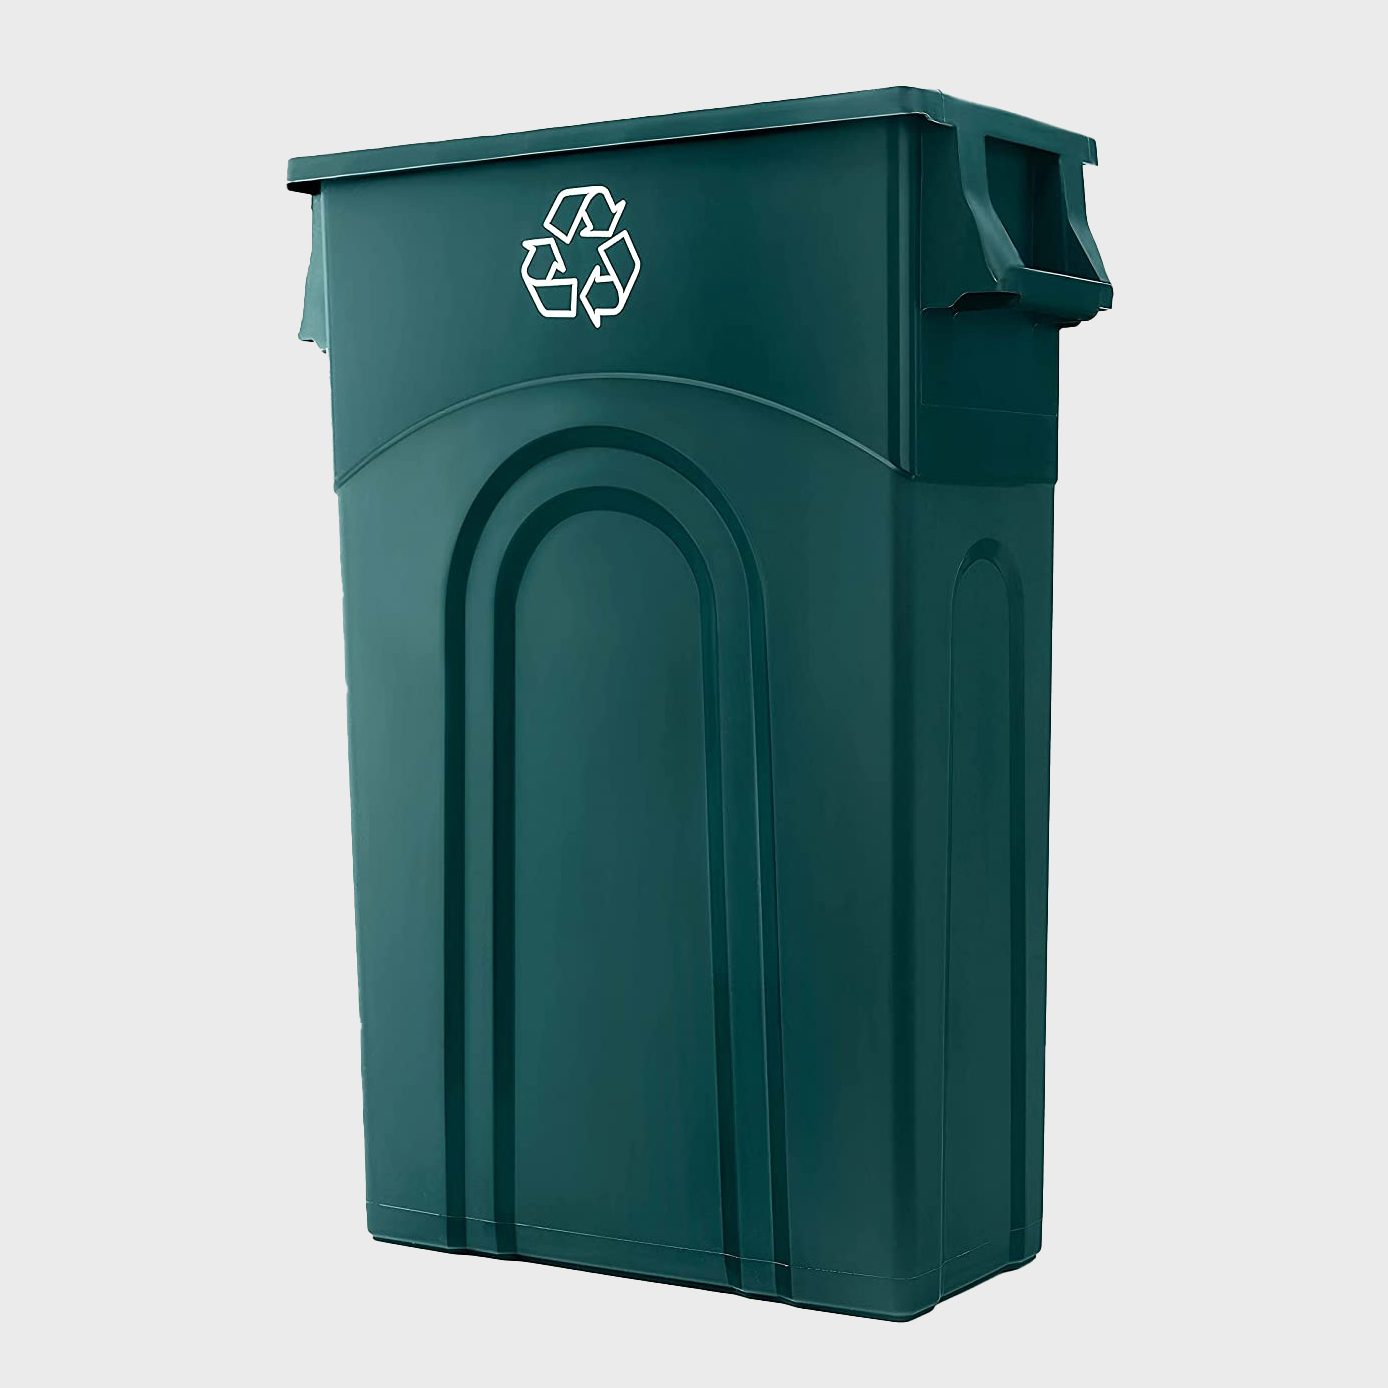 12 practical kitchen recycling bins that actually look good